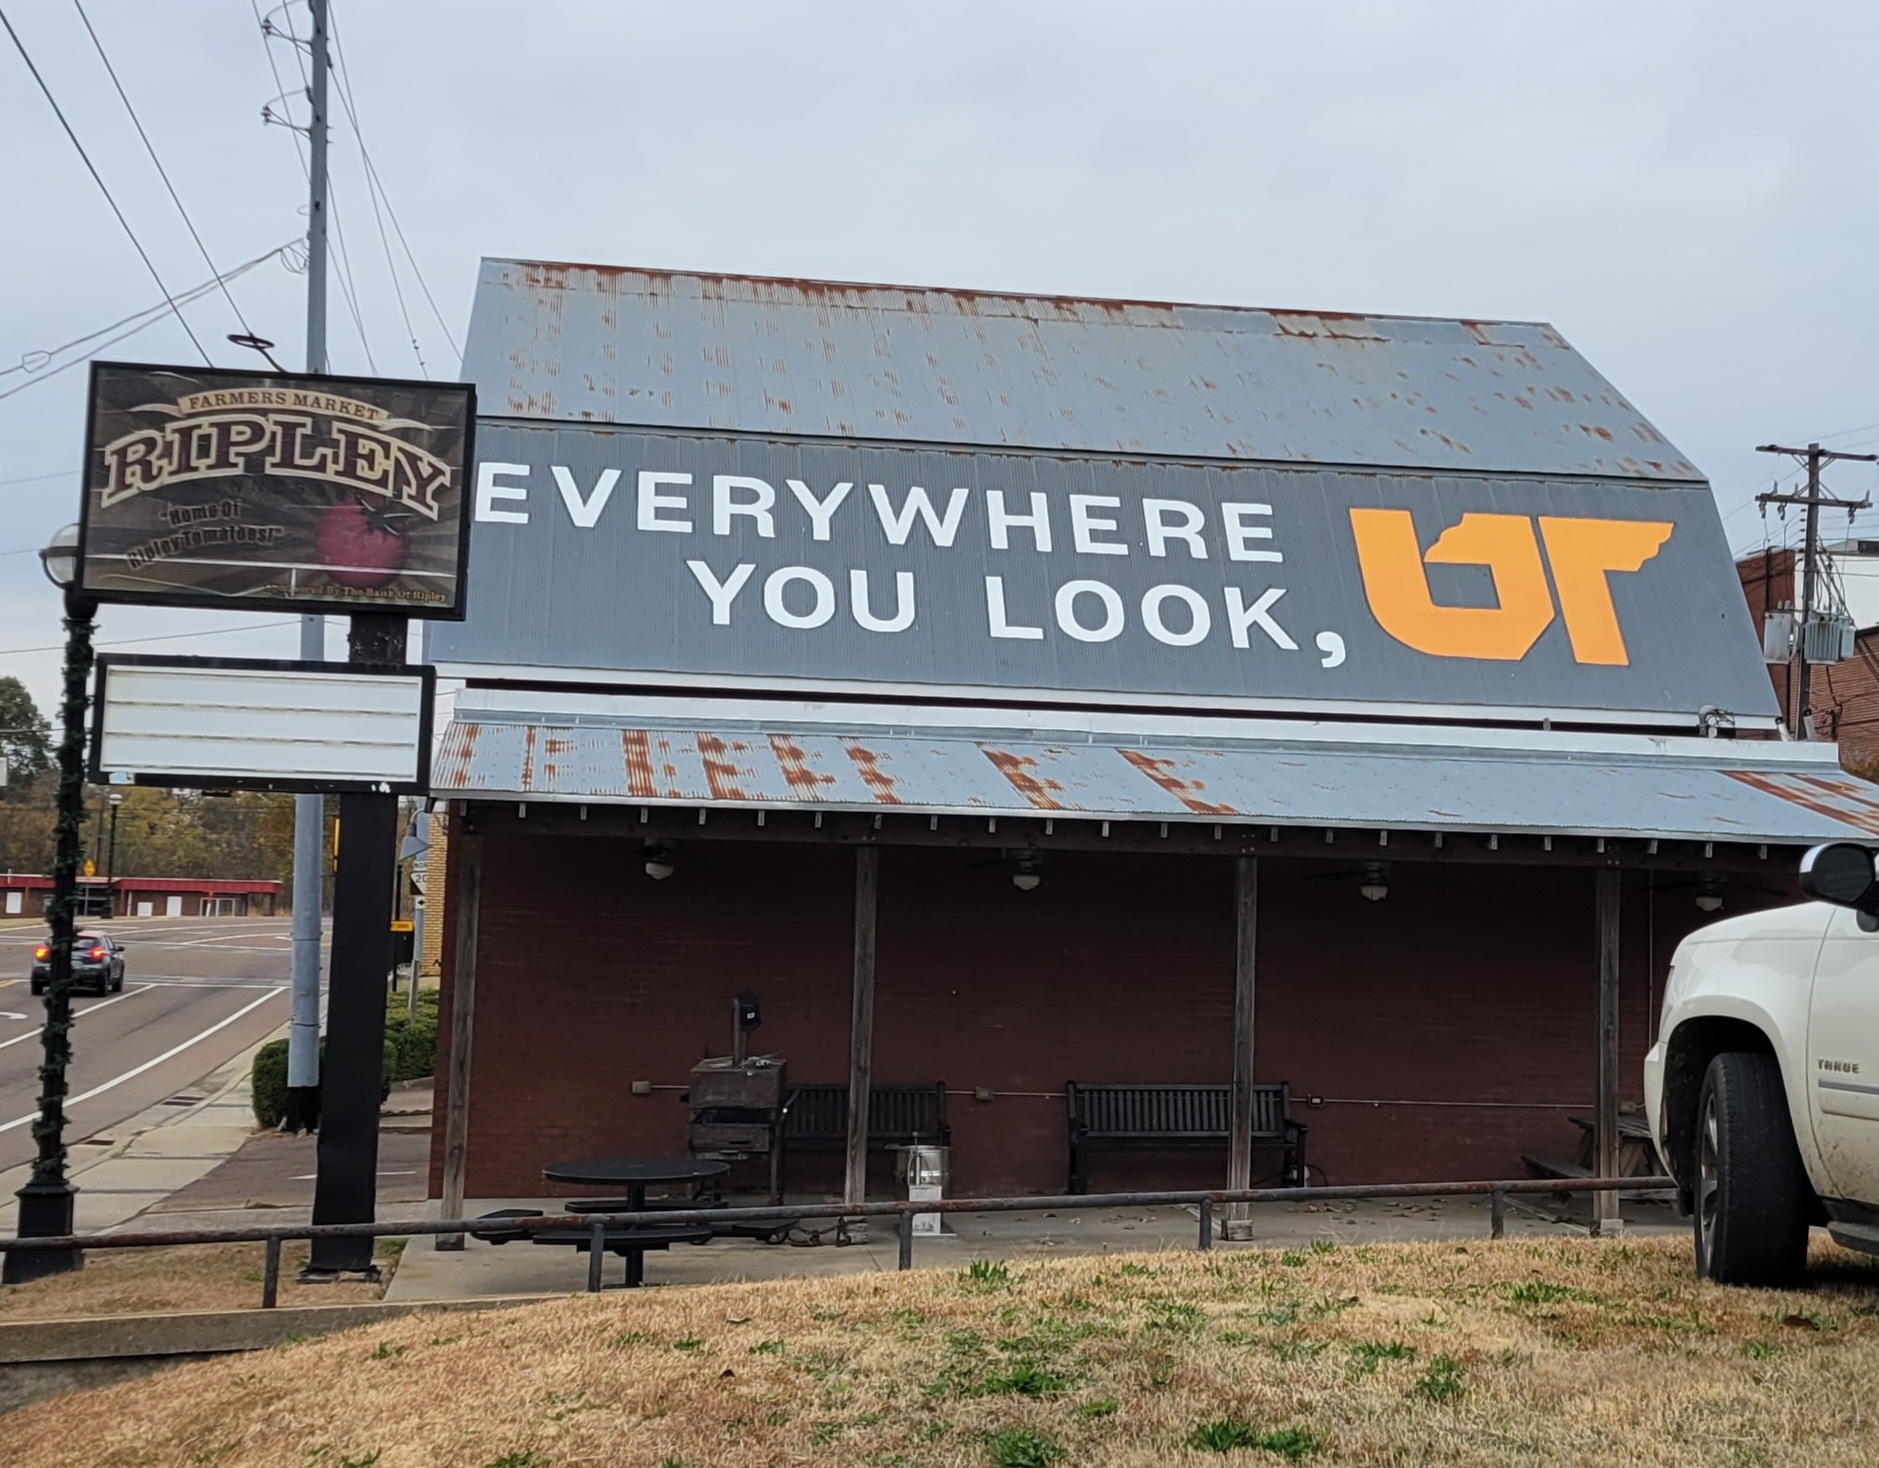 Orange and white "Everywhere You Look, UT" mural on metal roof of barn